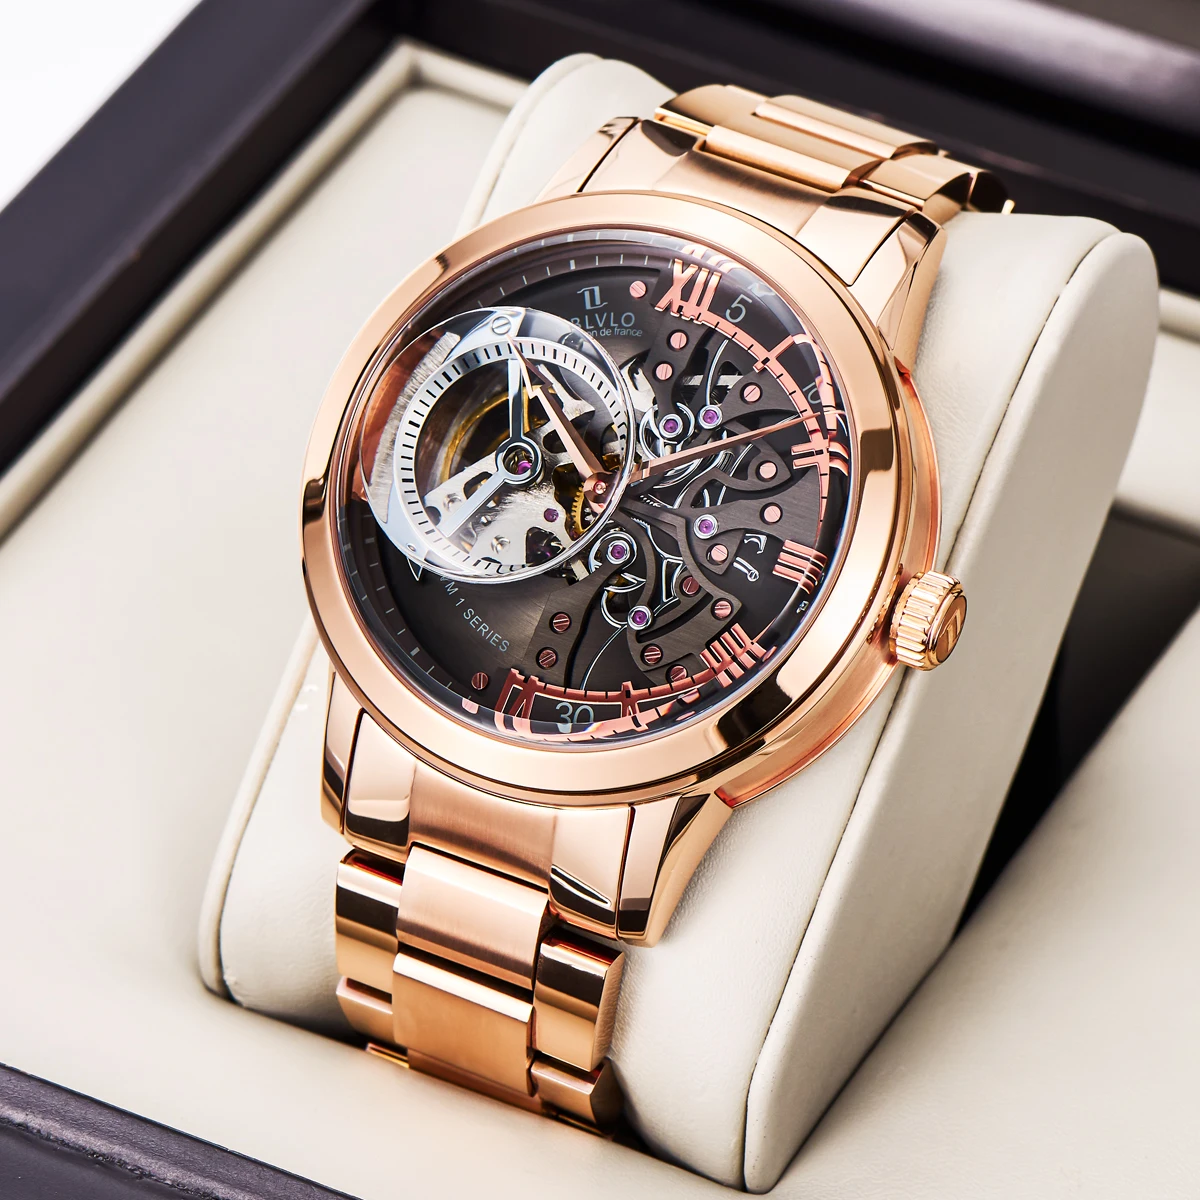 

OBLVLO New Design Skeleton Watches Rose Gold Automatic Watches With Sapphire Crystal Relogio Masculino VM